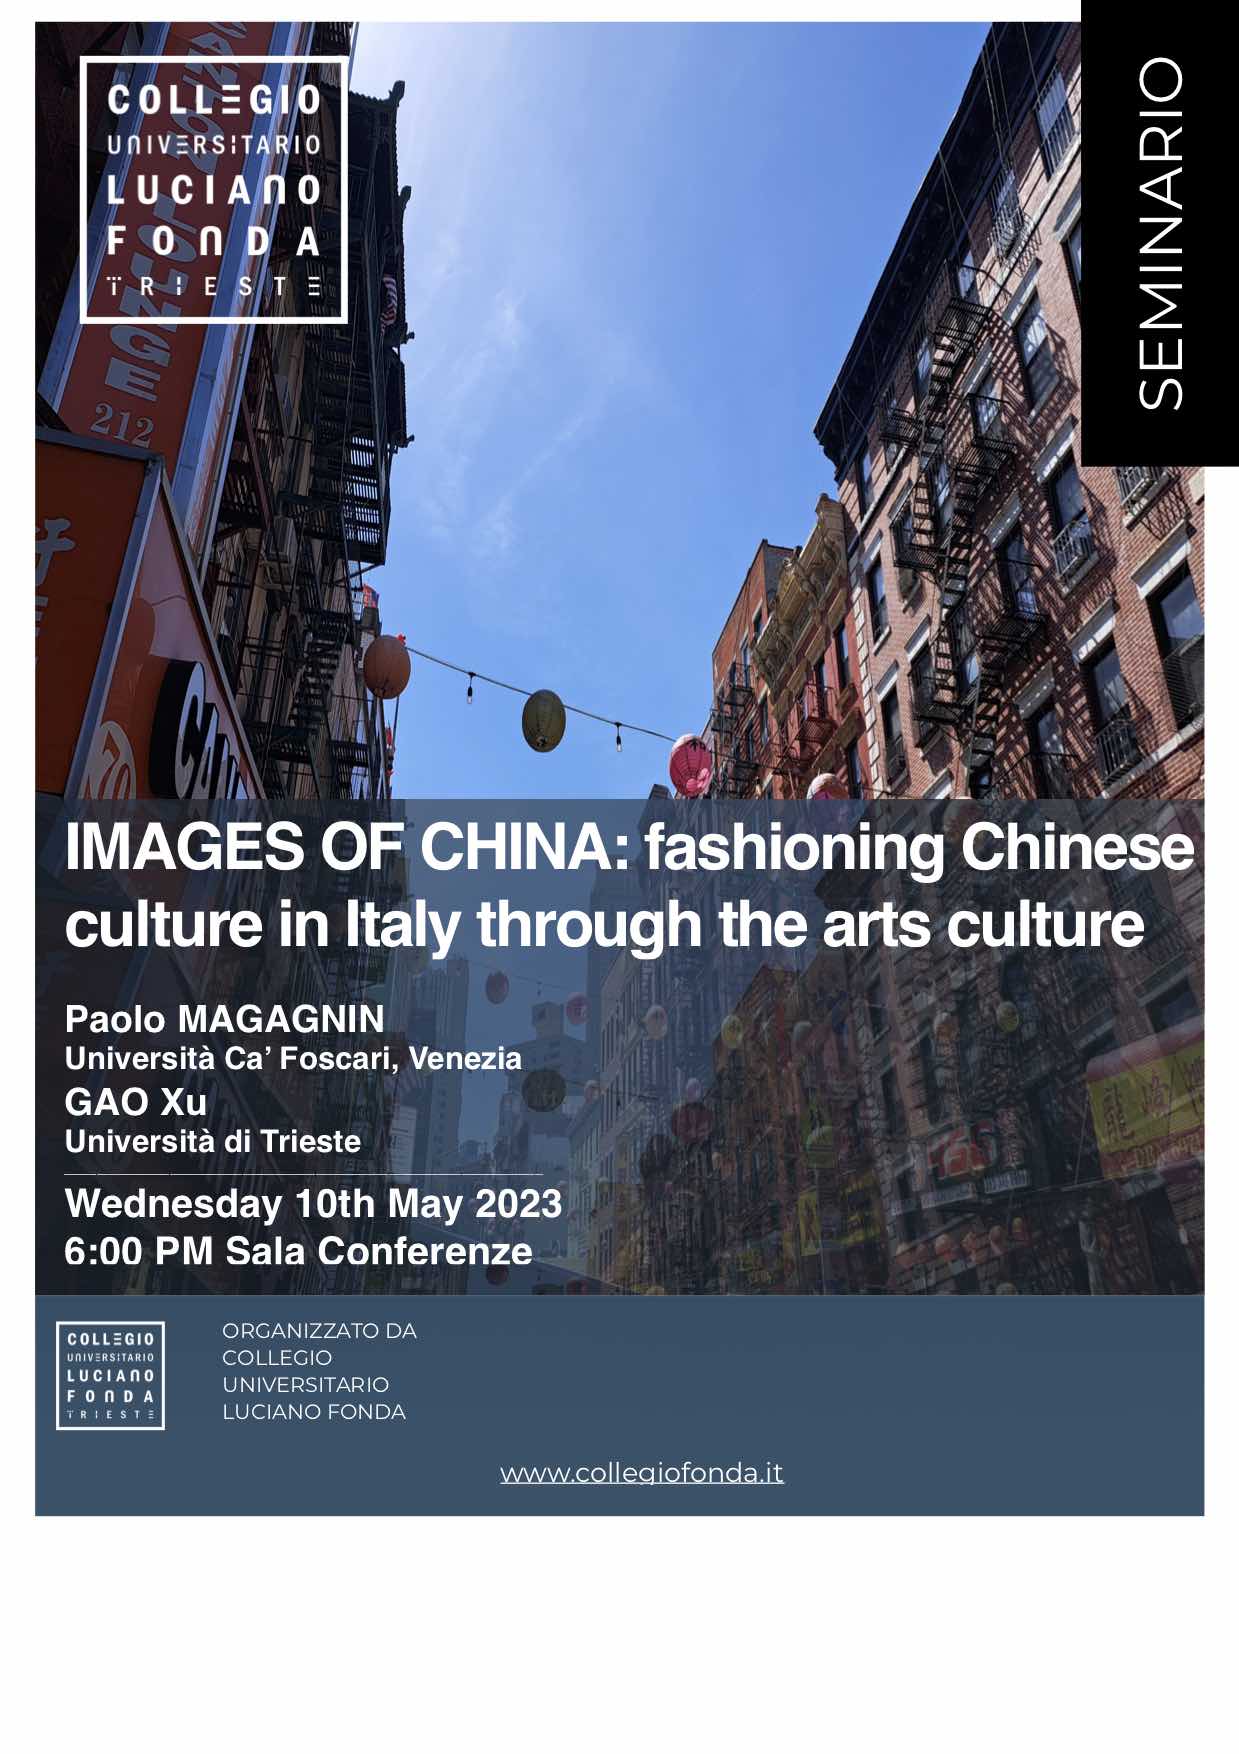 IMAGES OF CHINA: FASHIONING CHINESE CULTURE IN ITALY THROUGH THE ARTS – Wednesday, 10th of May 2023 – Seminar by Paolo Magagnin and Gao Xu